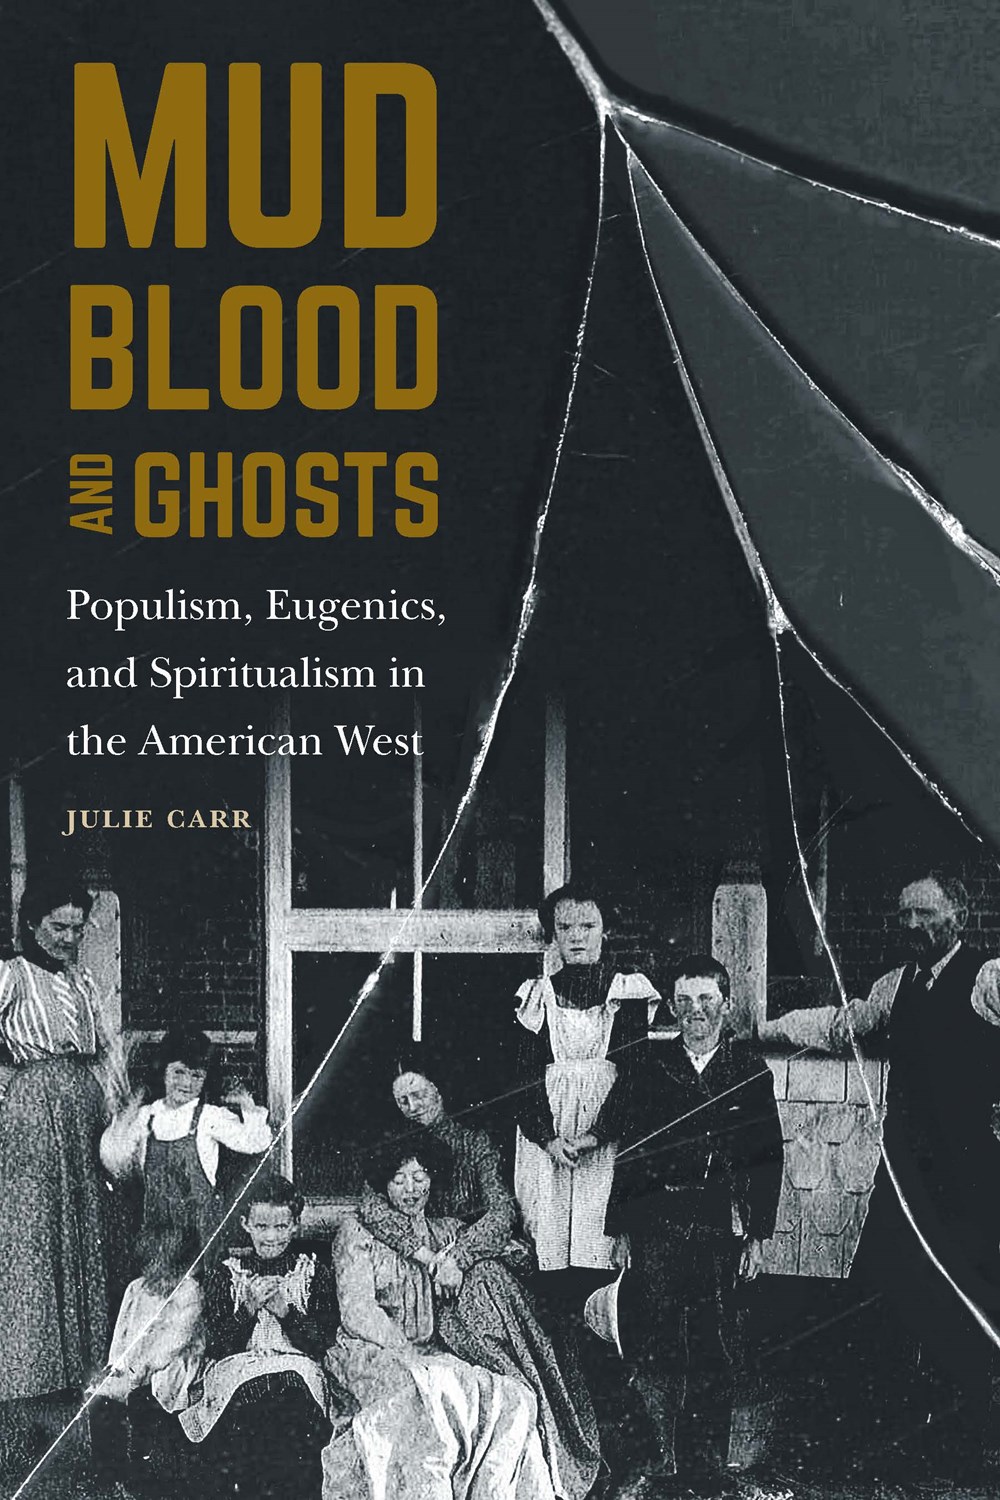 Mud, Blood, and Ghosts: Populism, Eugenics, and Spiritualism in the American West